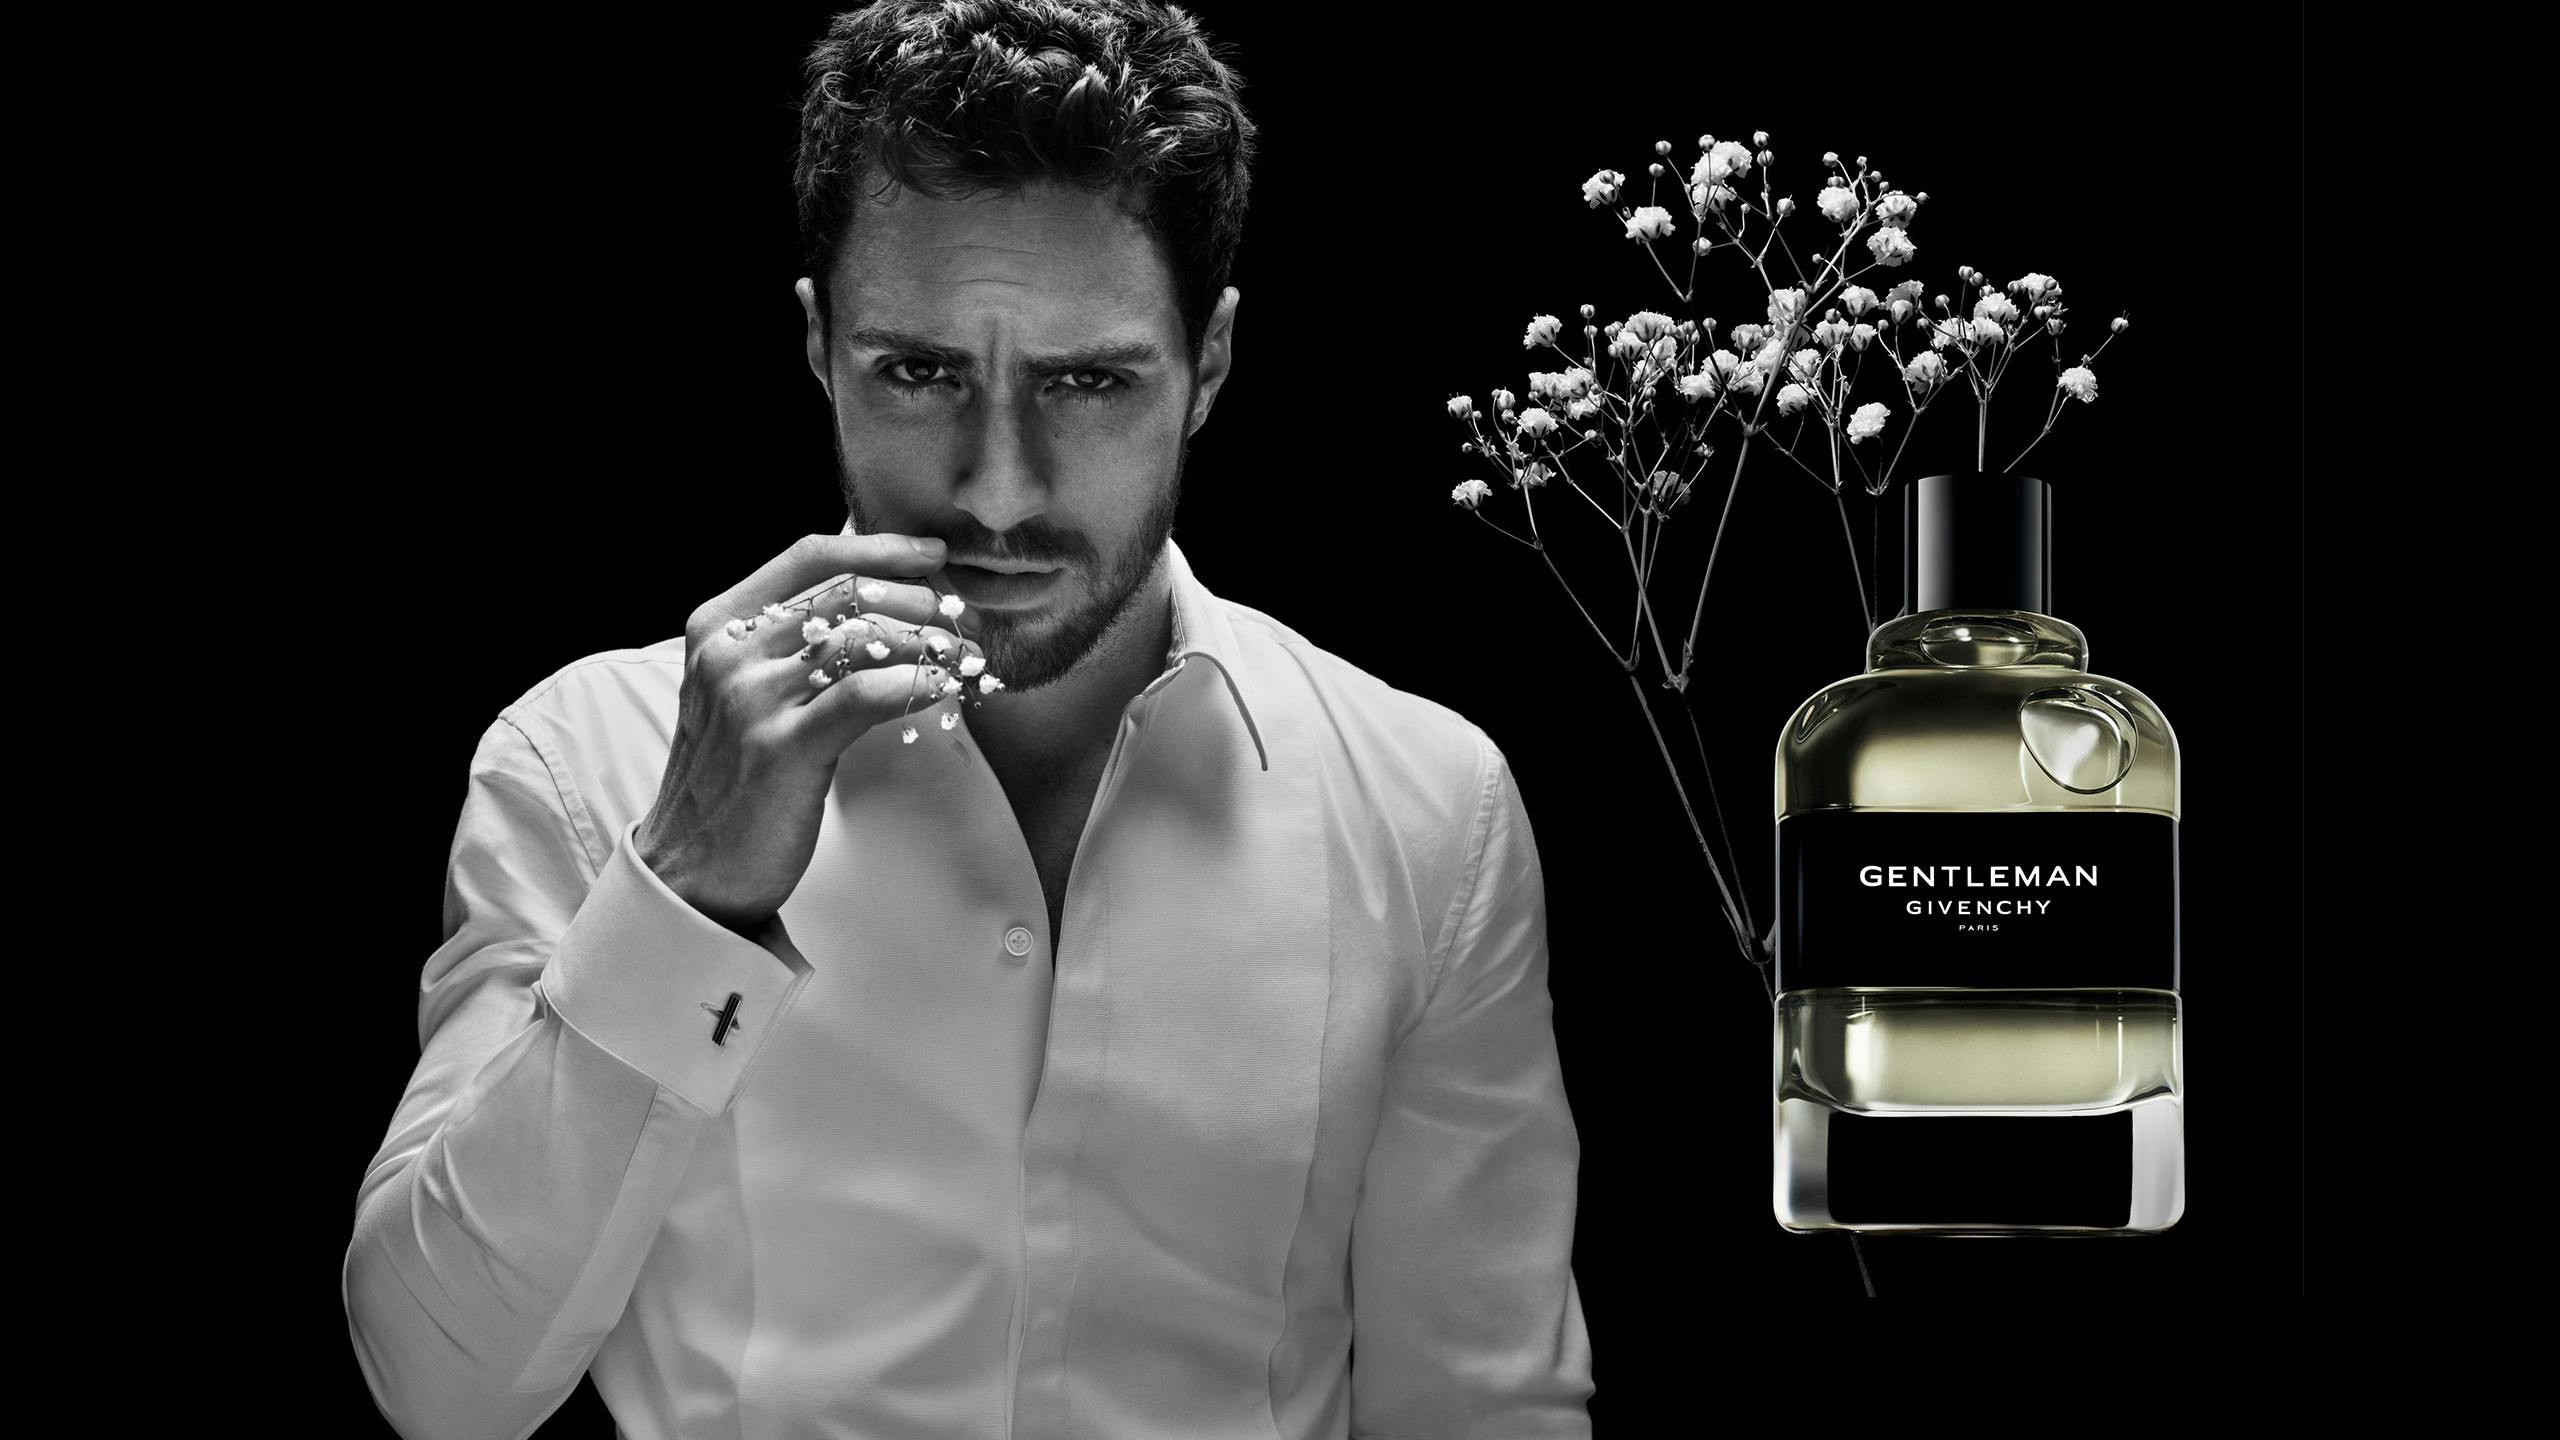 Have You Met the New Givenchy Gentleman? - Givenchy Gentleman Fragrance